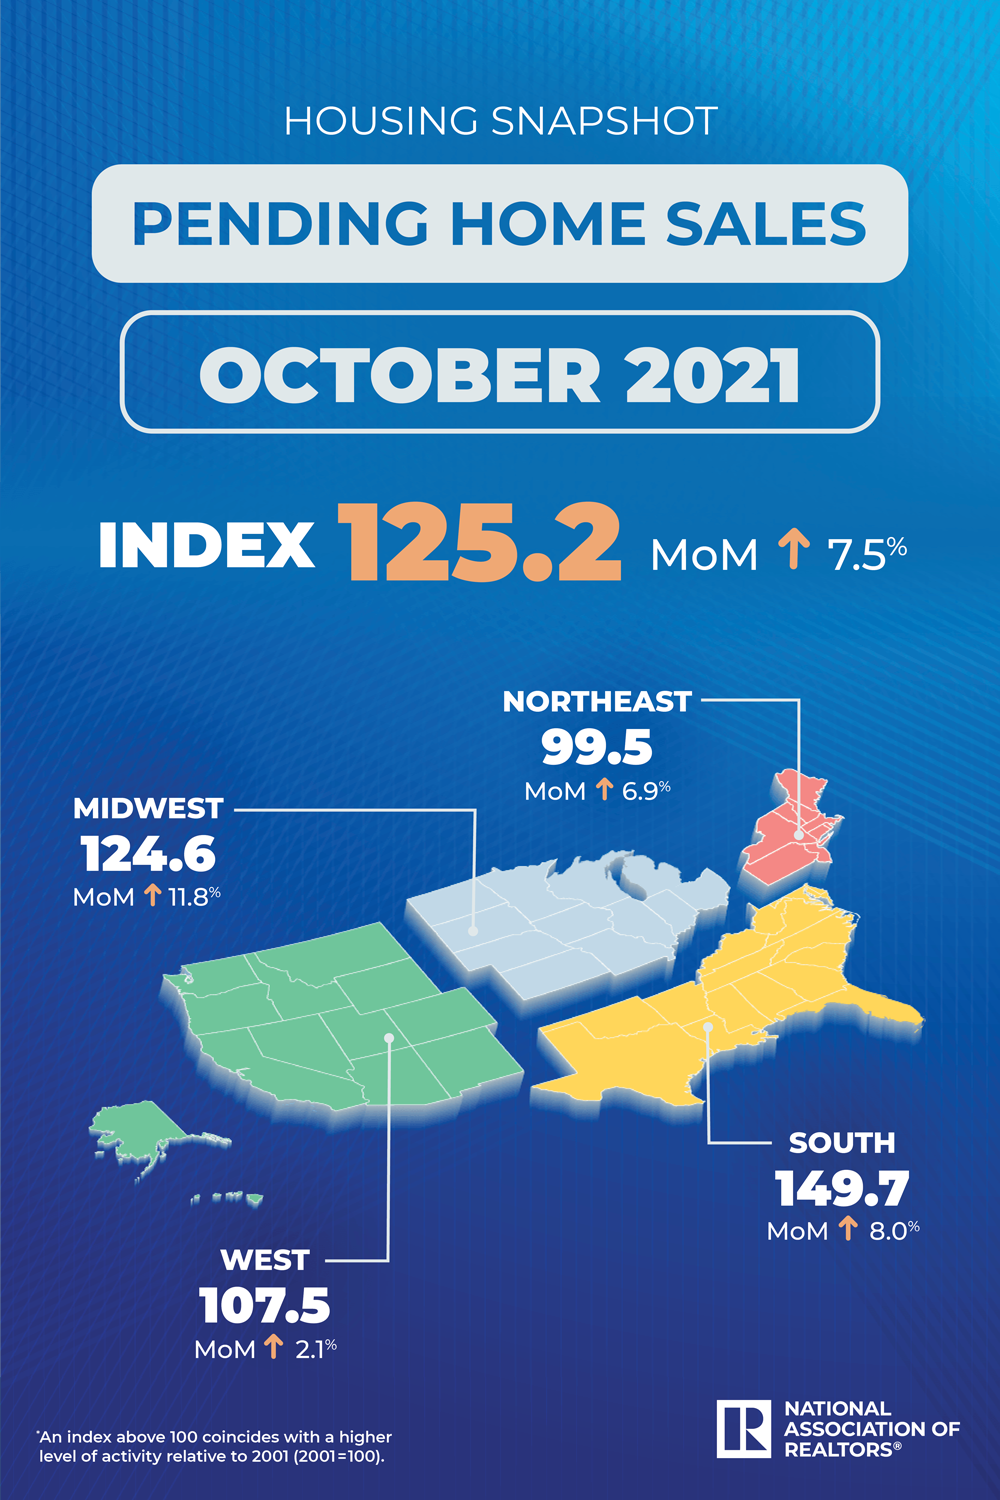 A graphic chart of the U.S. showing pending home sales information from November 2021